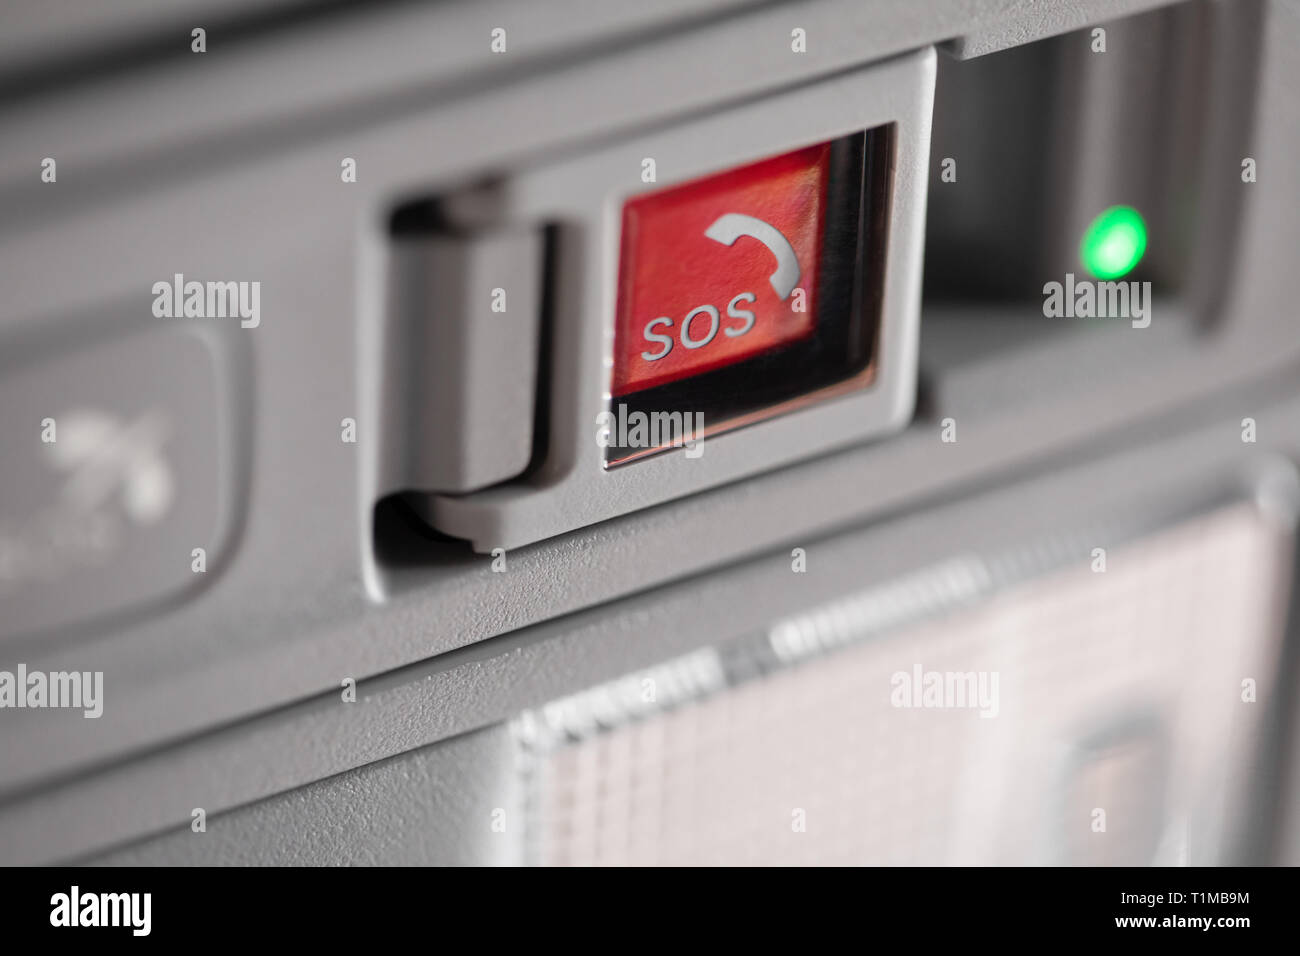 Emergency sos button which is used for help after car accident Stock Photo